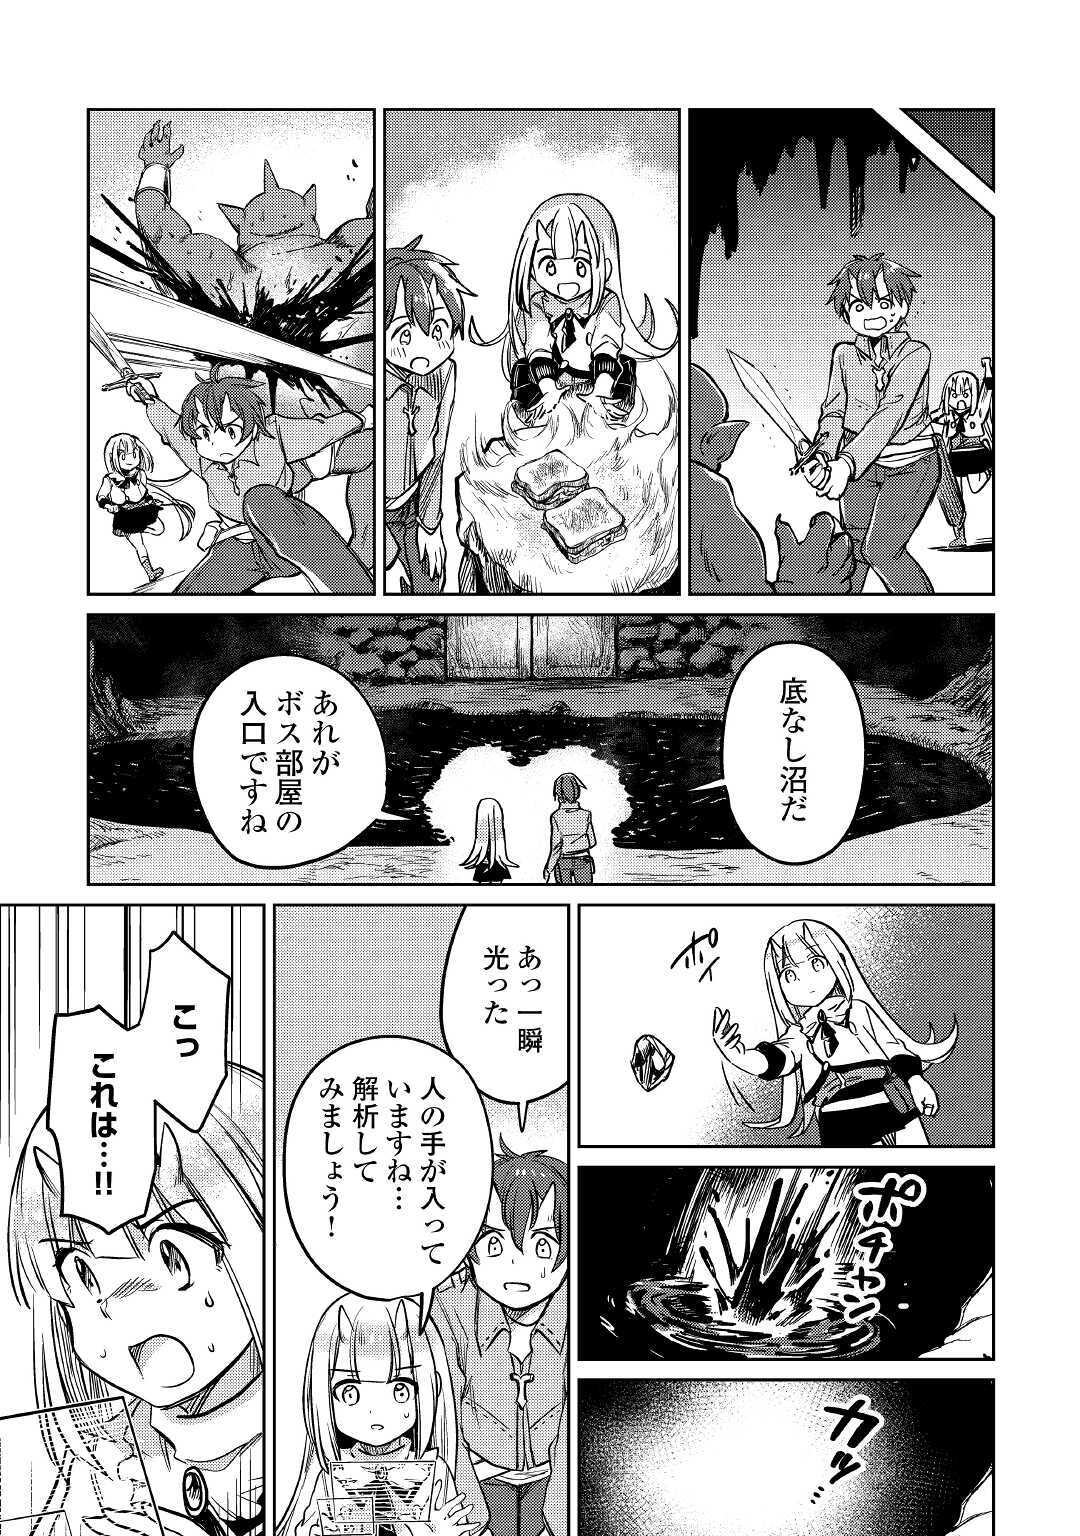 The Former Structural Researcher’s Story of Otherworldly Adventure 第28話 - Page 25